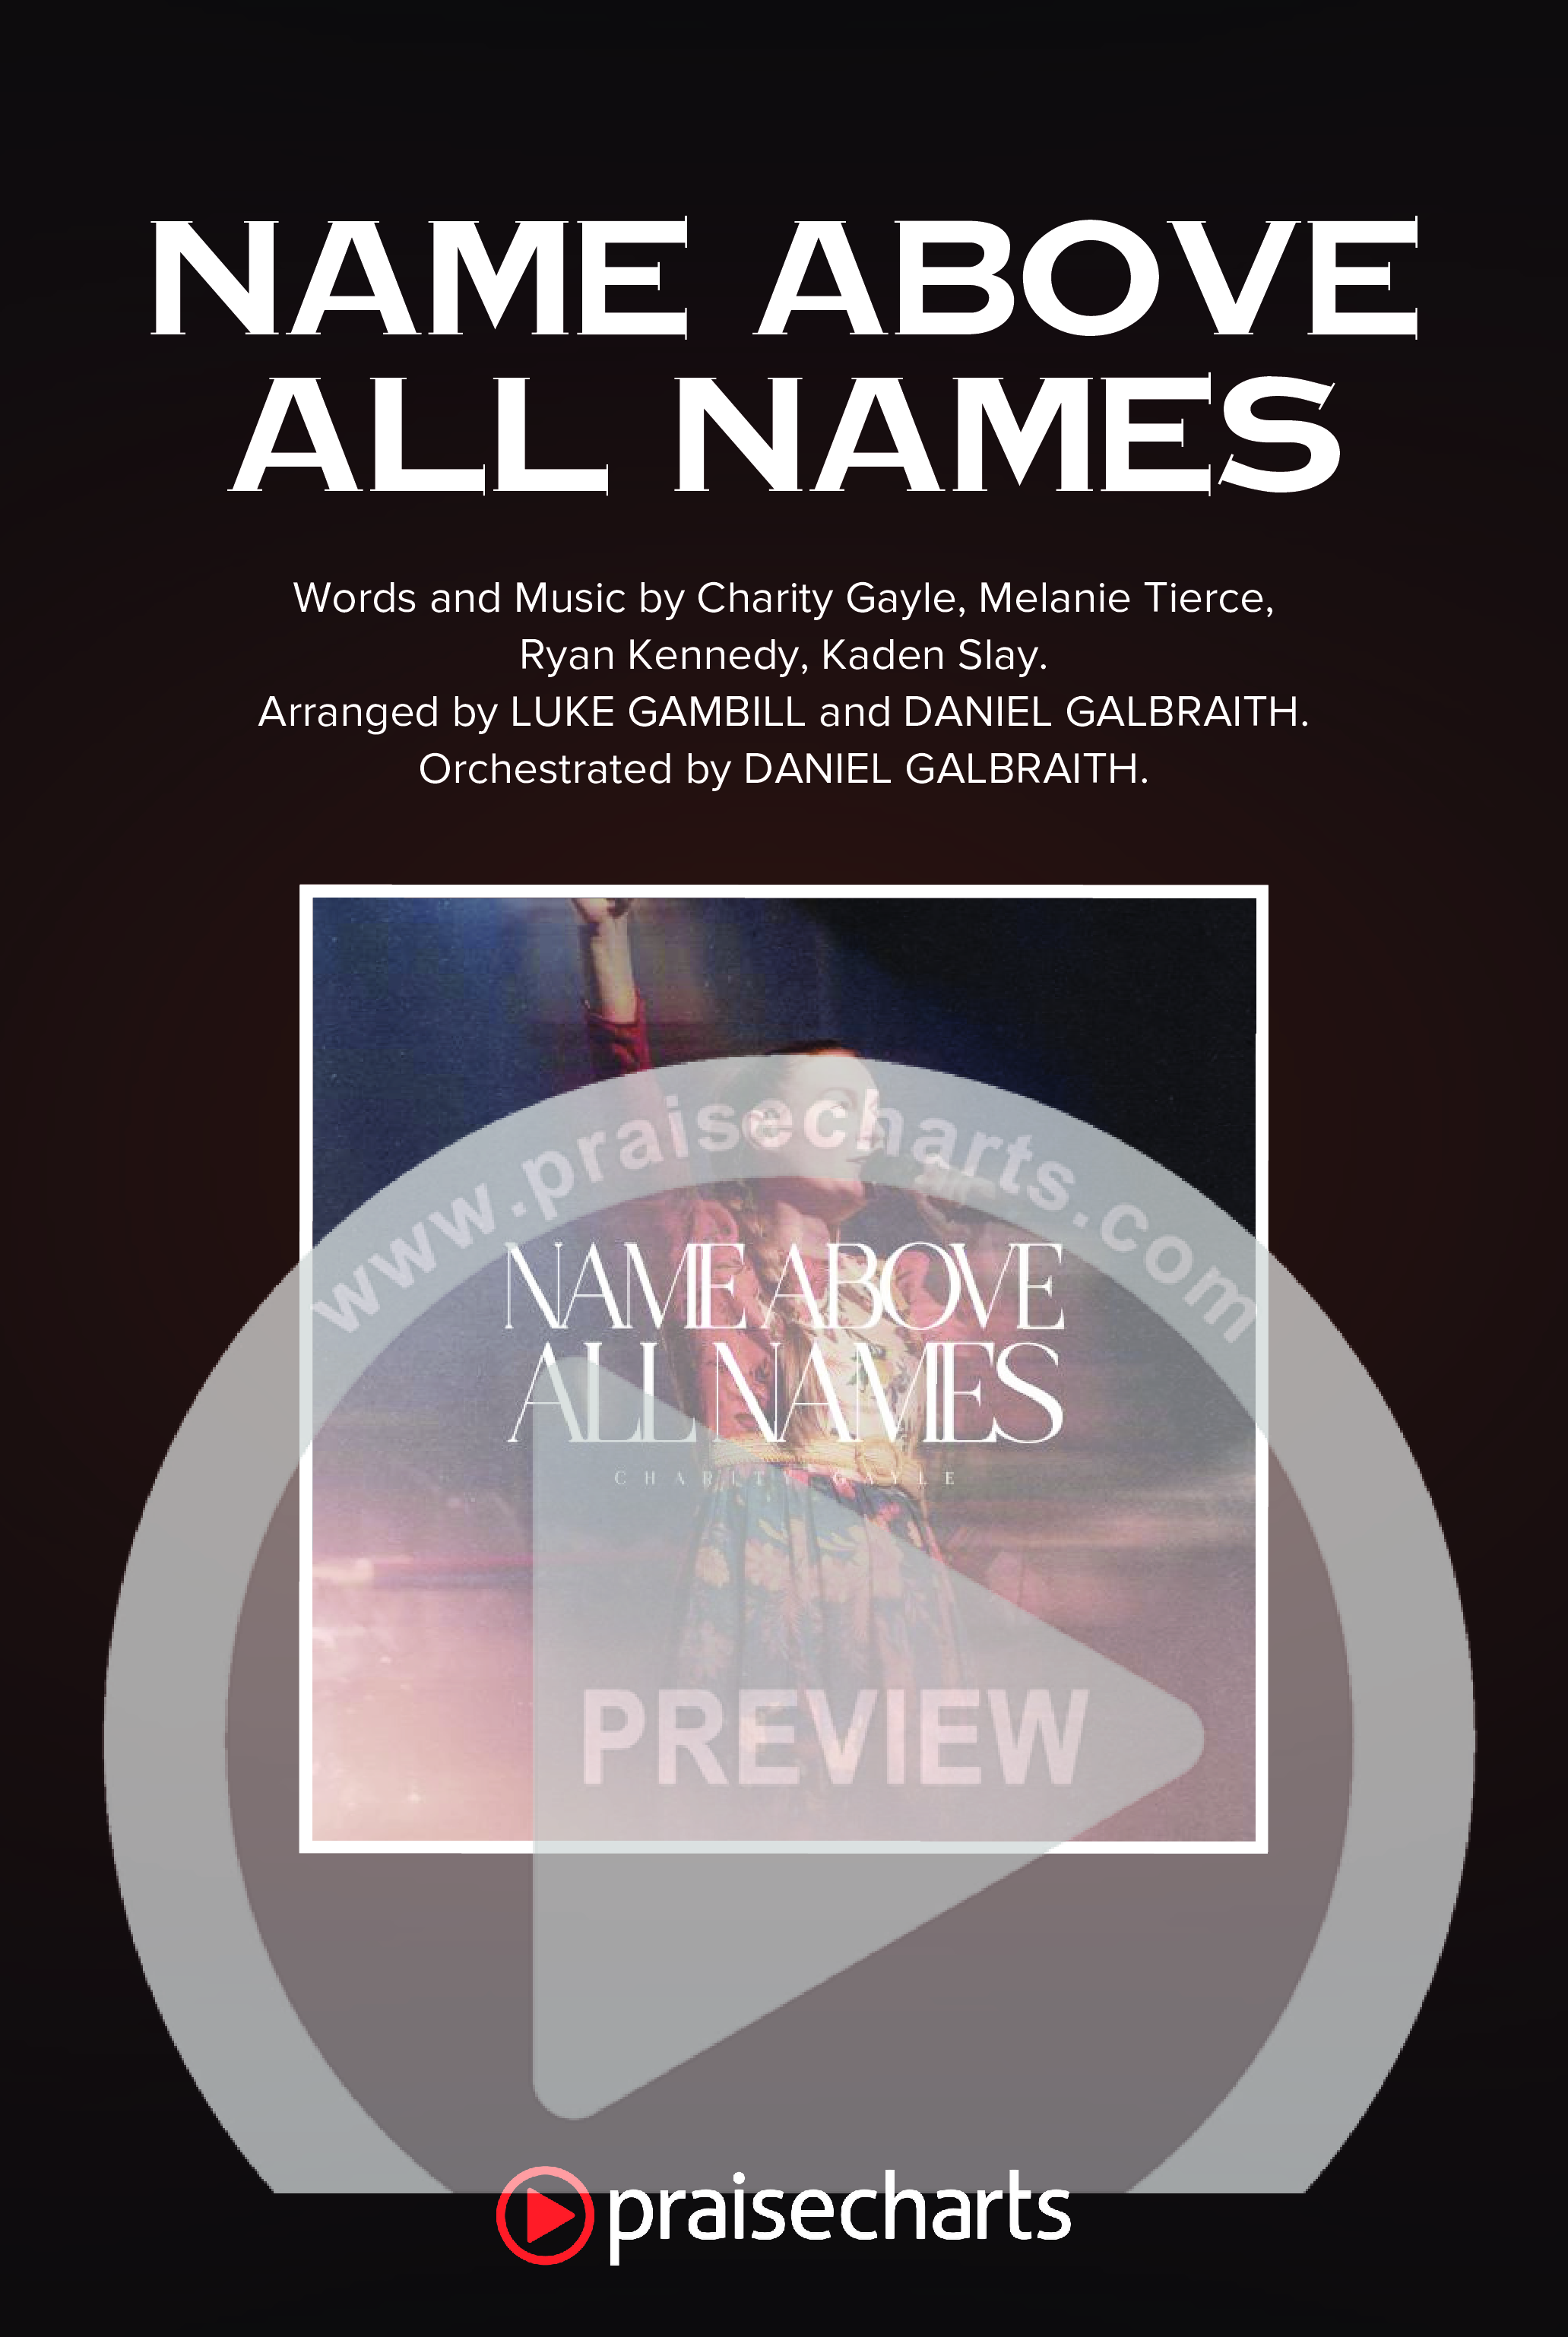 Name Above All Names (Unison/2-Part) Octavo Cover Sheet (Charity Gayle / Arr. Luke Gambill)